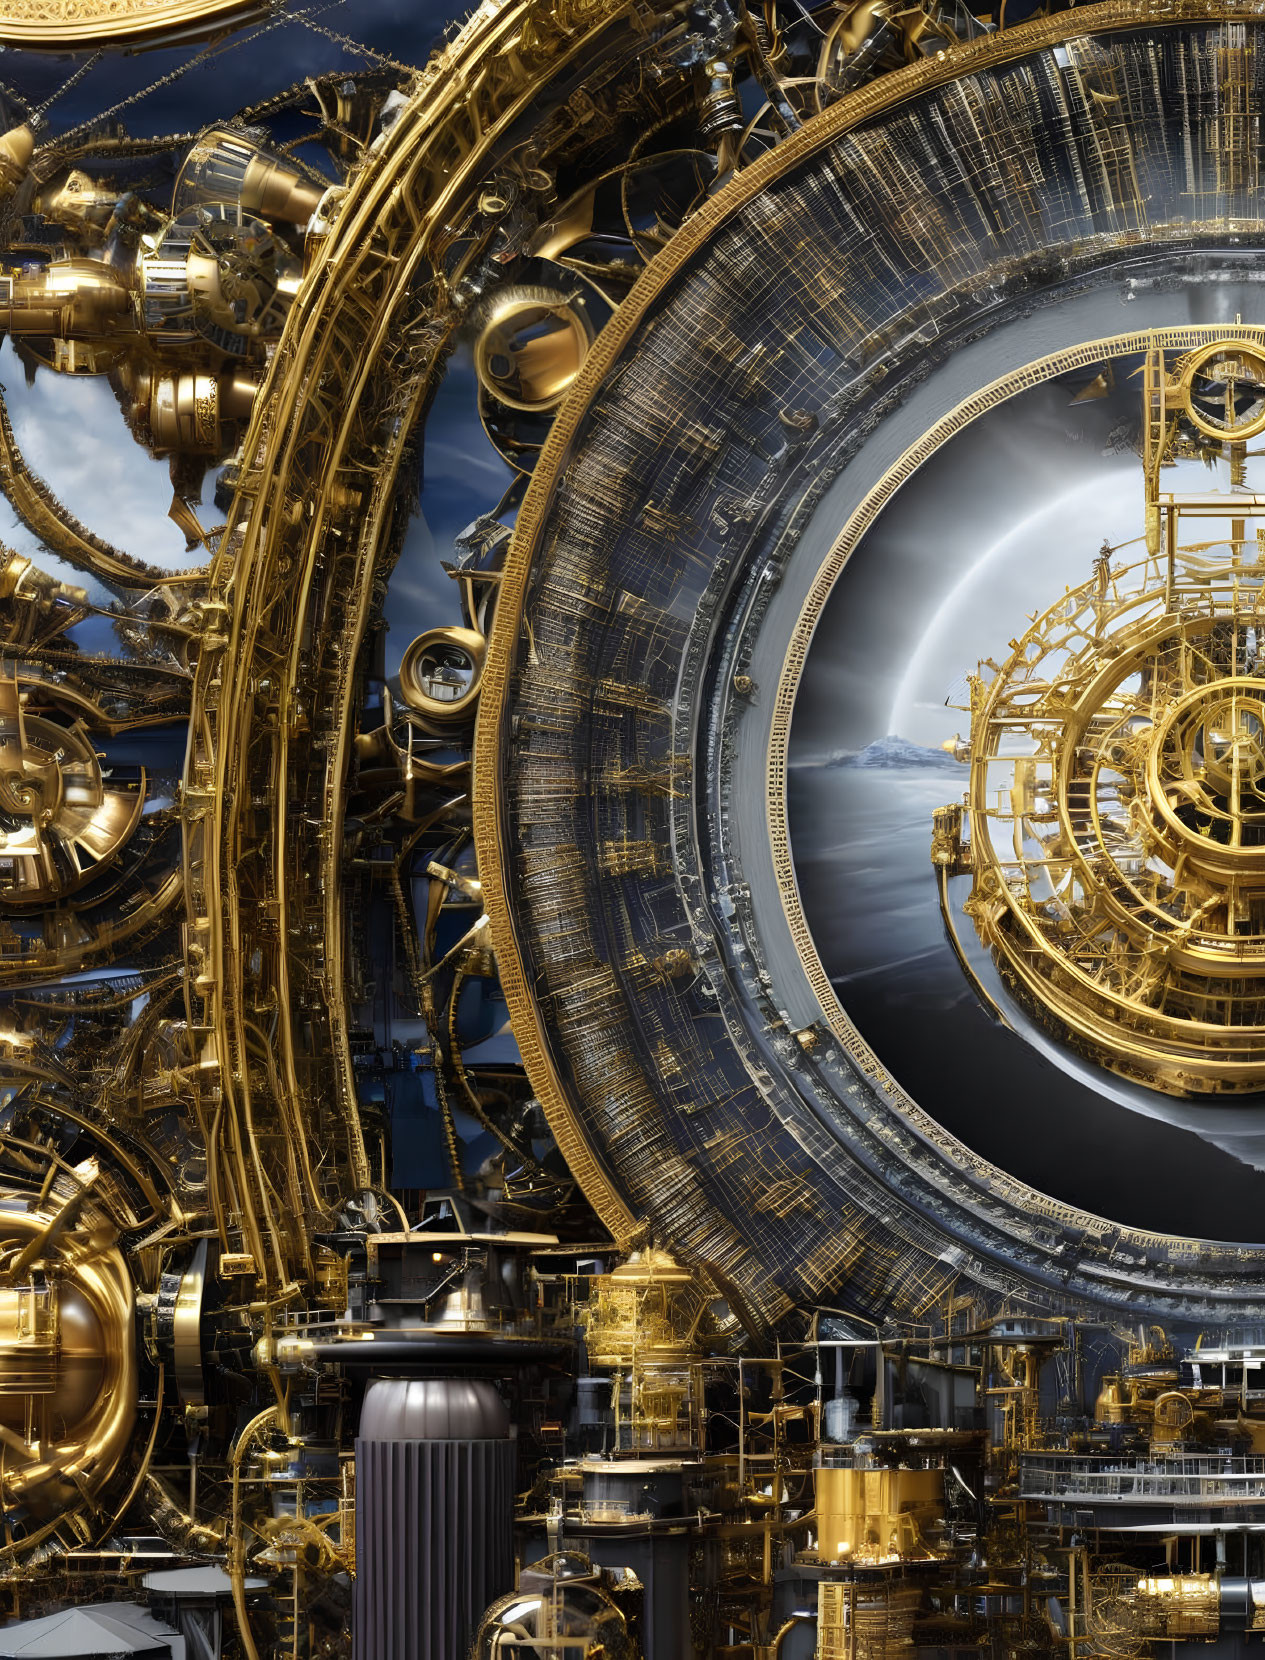 Detailed steampunk machinery with golden gears and pipes on moonlit night landscape